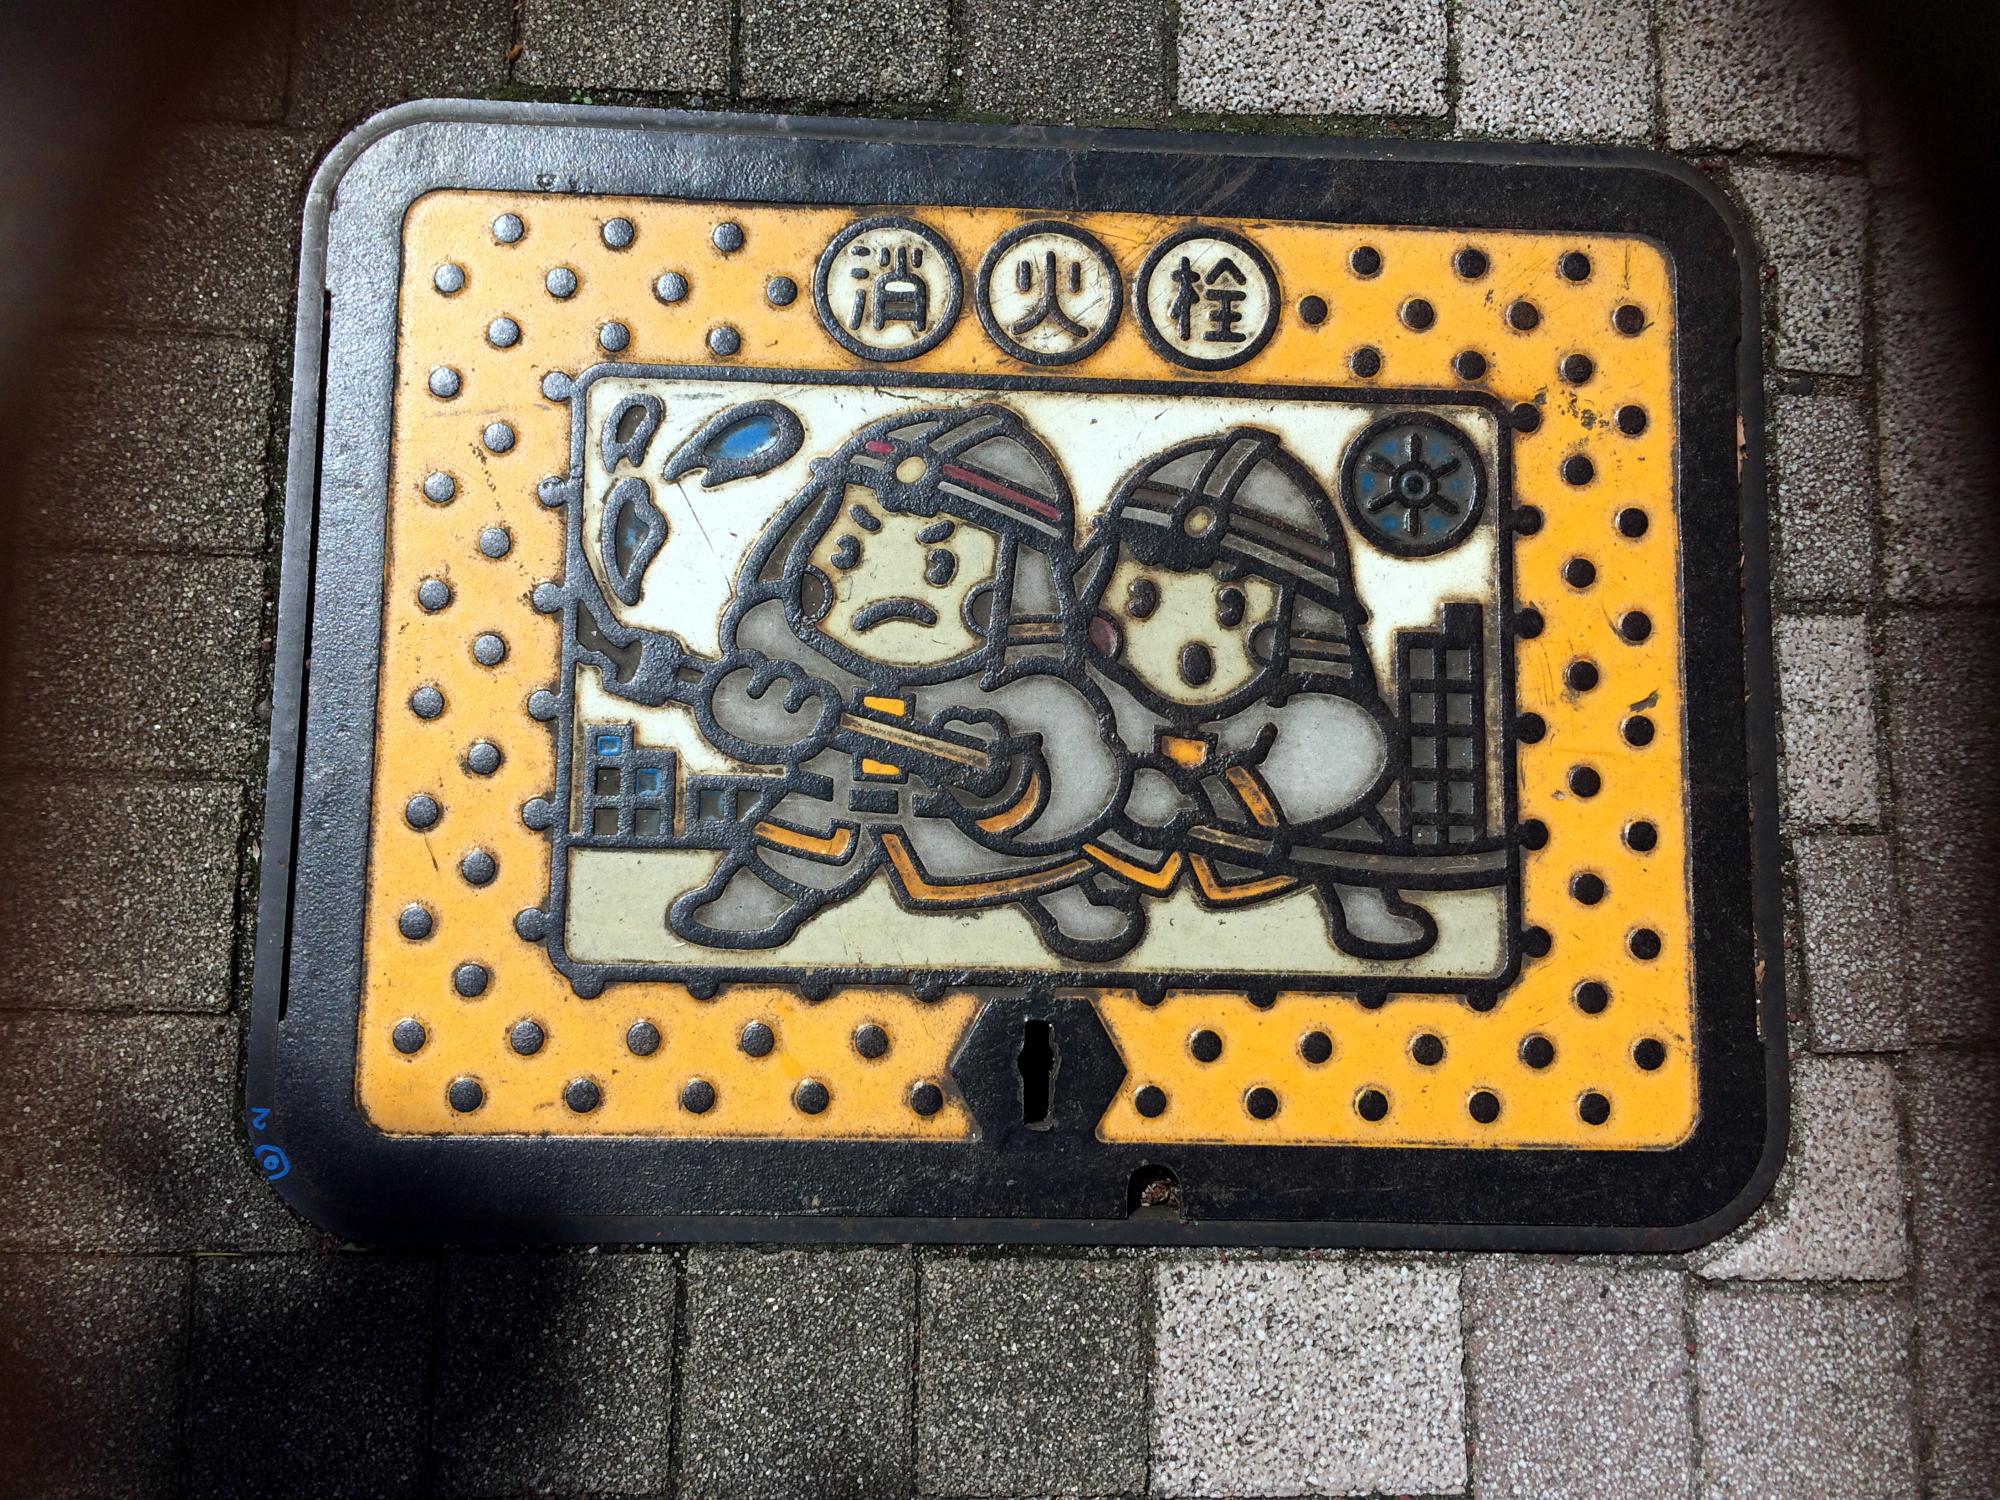 Signs Of Japan - Fire Department